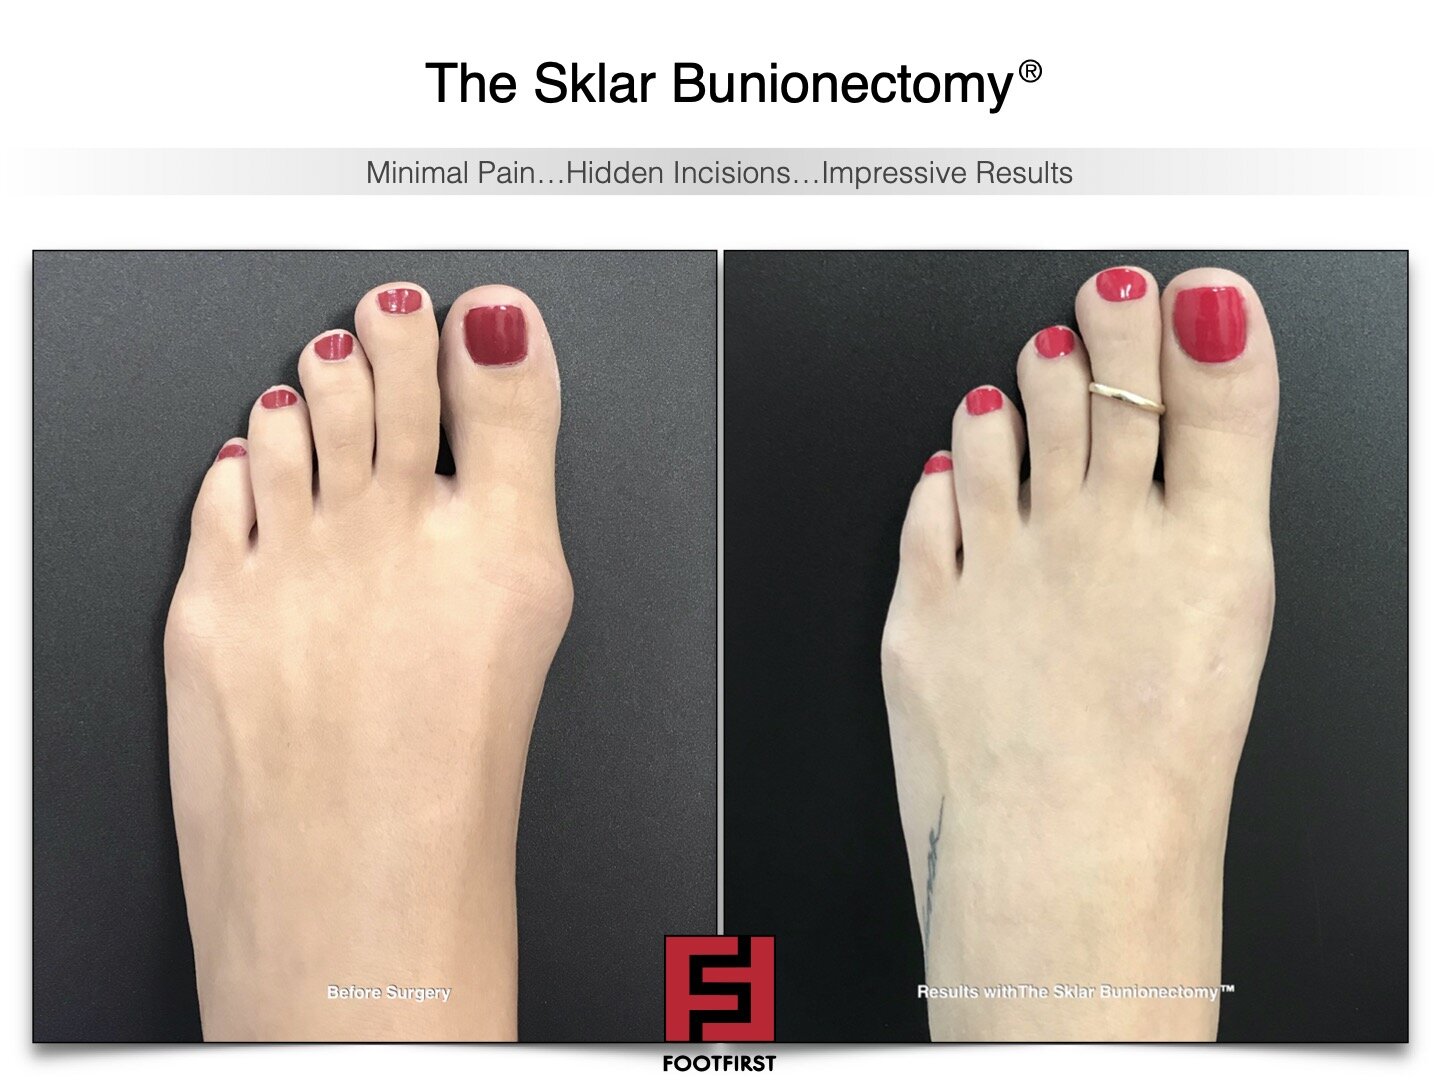 www.footfirst.com | Cosmetic Bunion and Toe Shortening Surgery COPYRIGHT FOOTFIRST 144.jpg